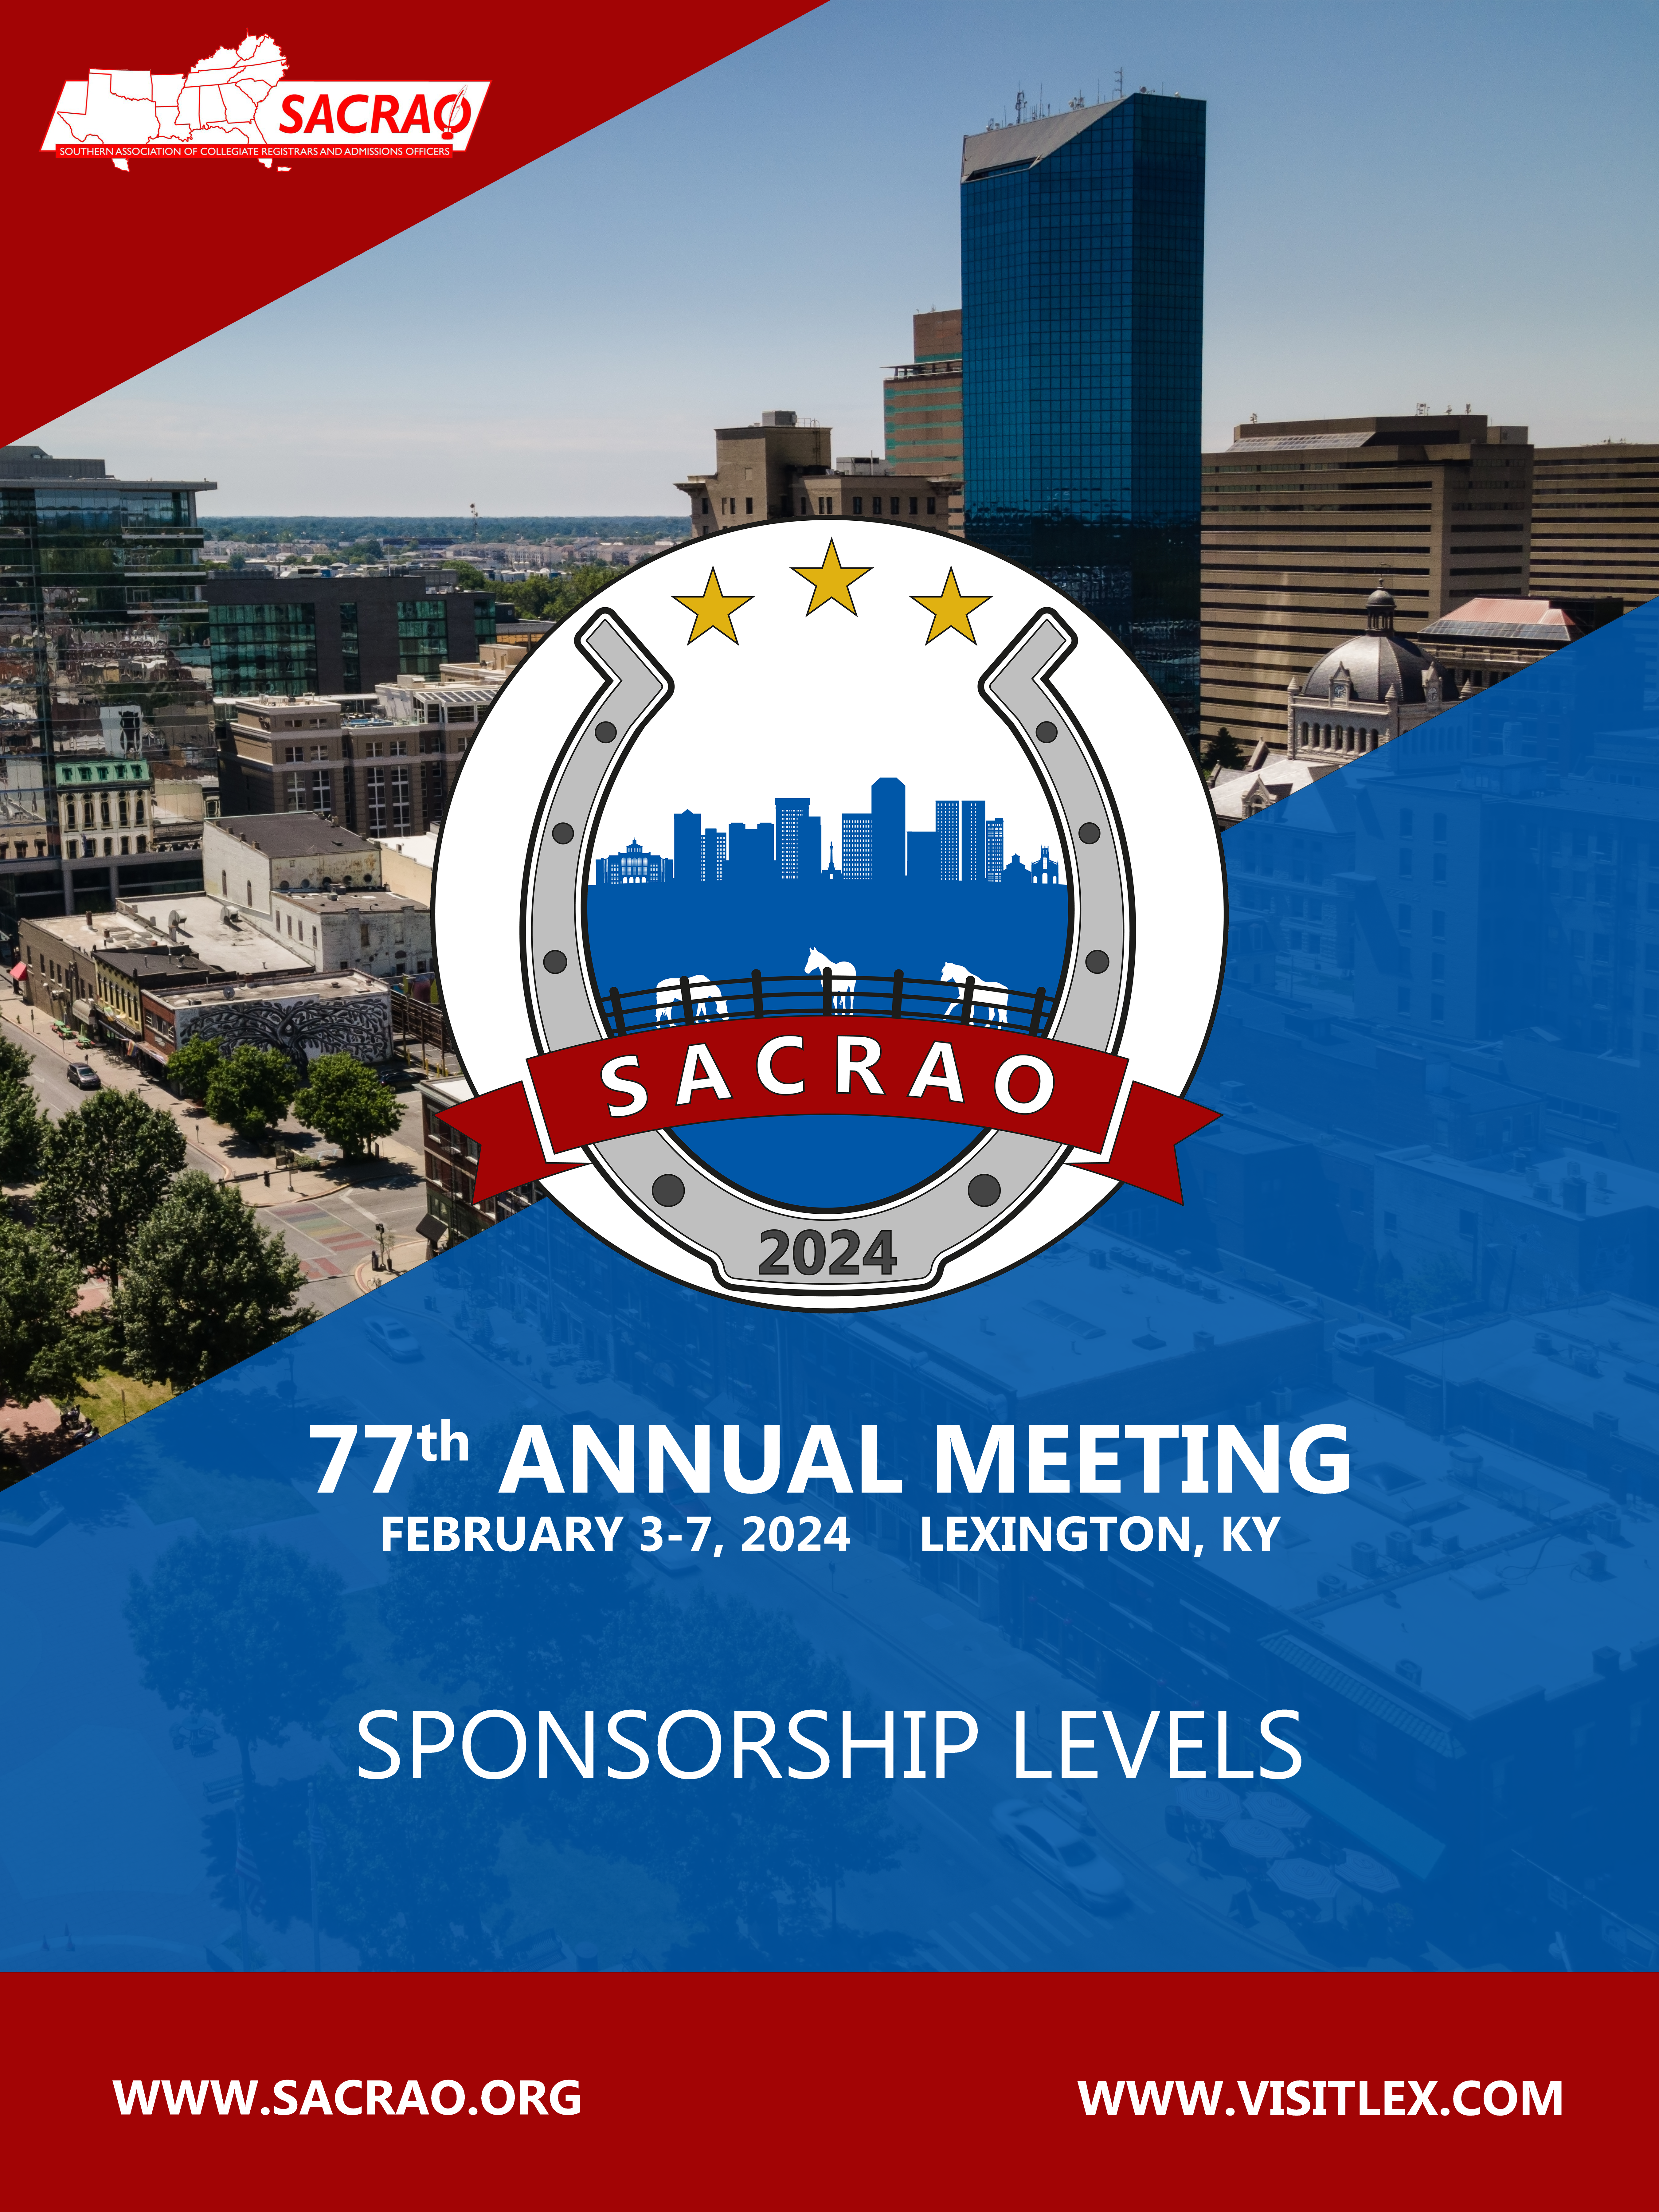 A cover page with the SACRAO 2024 logo overtop of the Lexington city skyline.